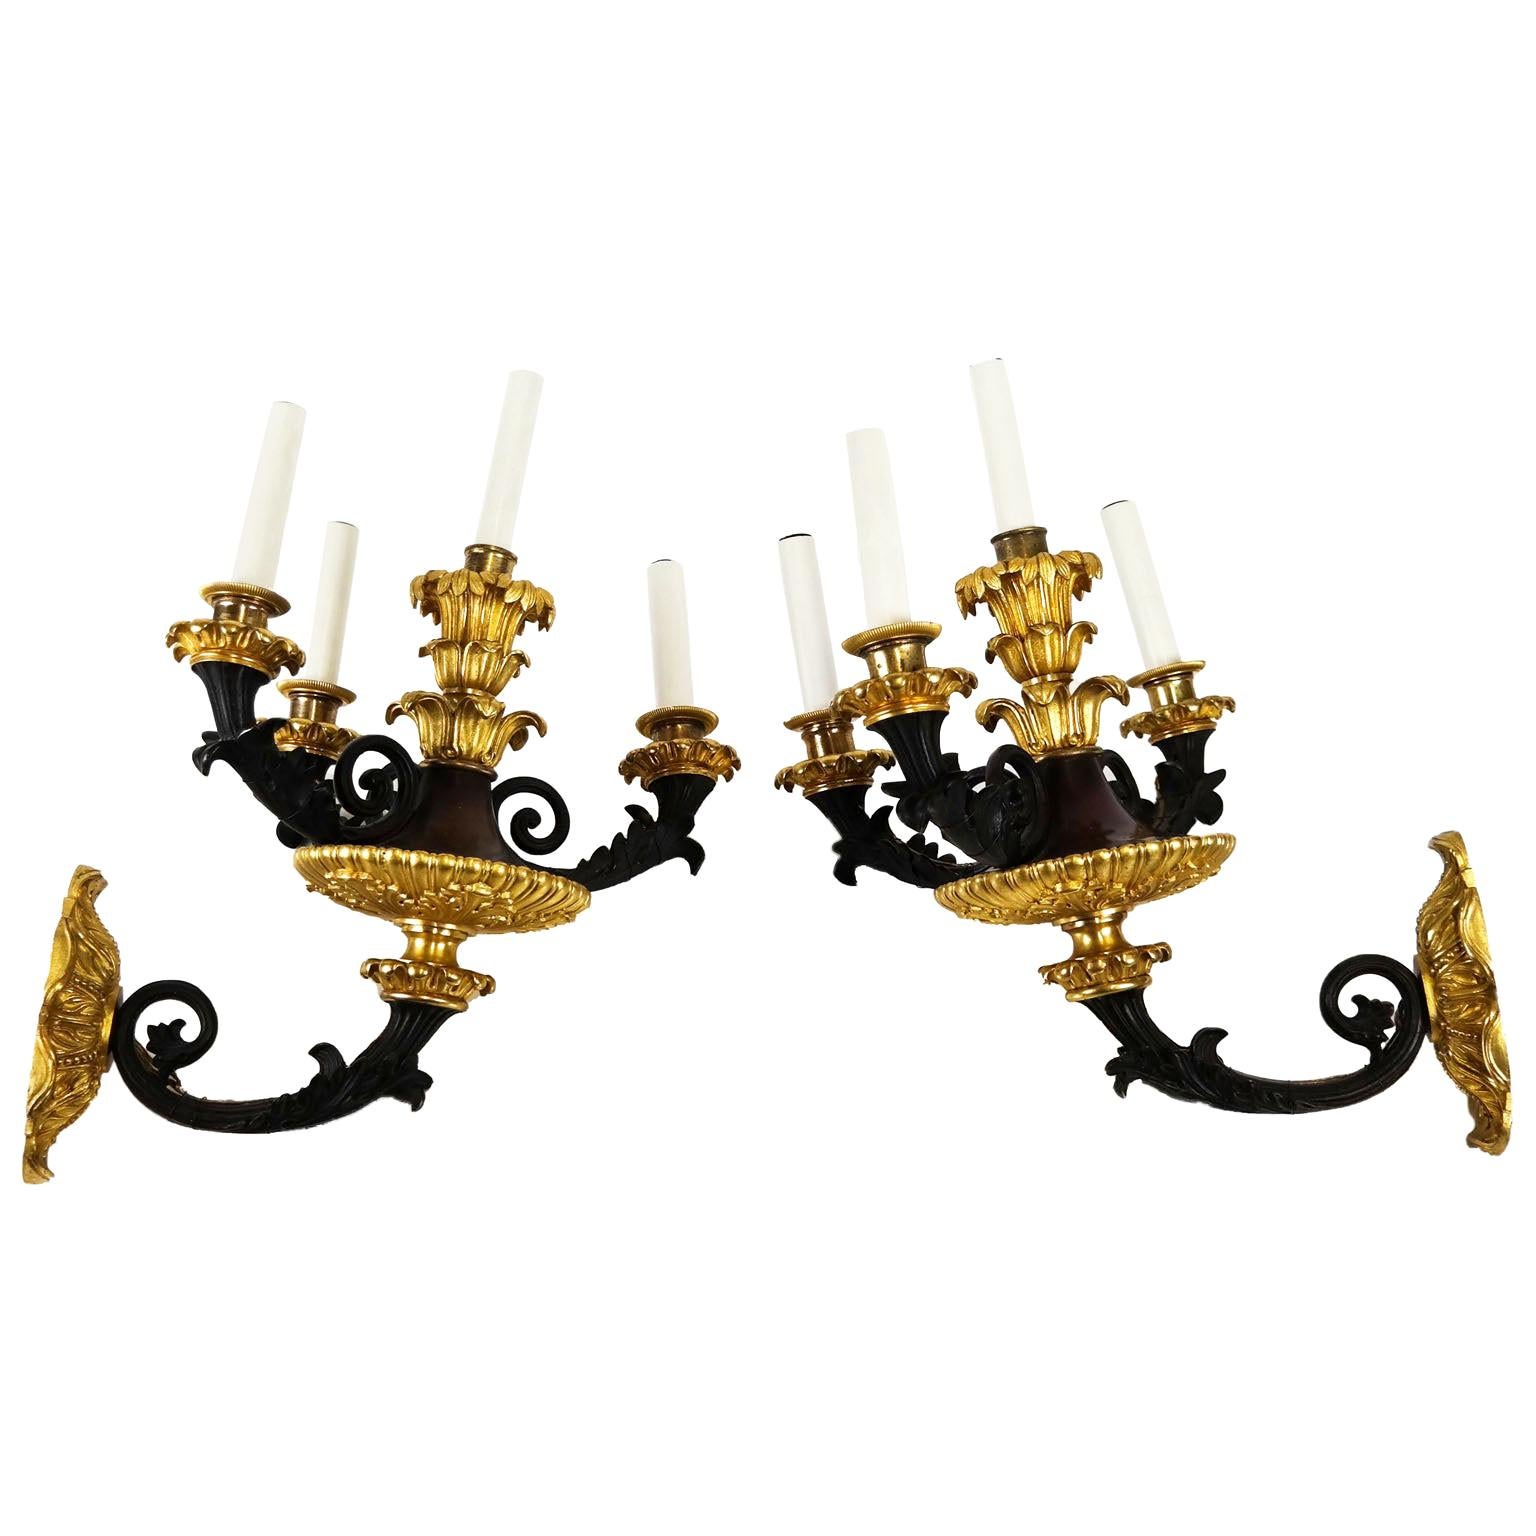 French 19th Century Neoclassical Empire Revival Style Bronze Wall Sconces, Pair For Sale